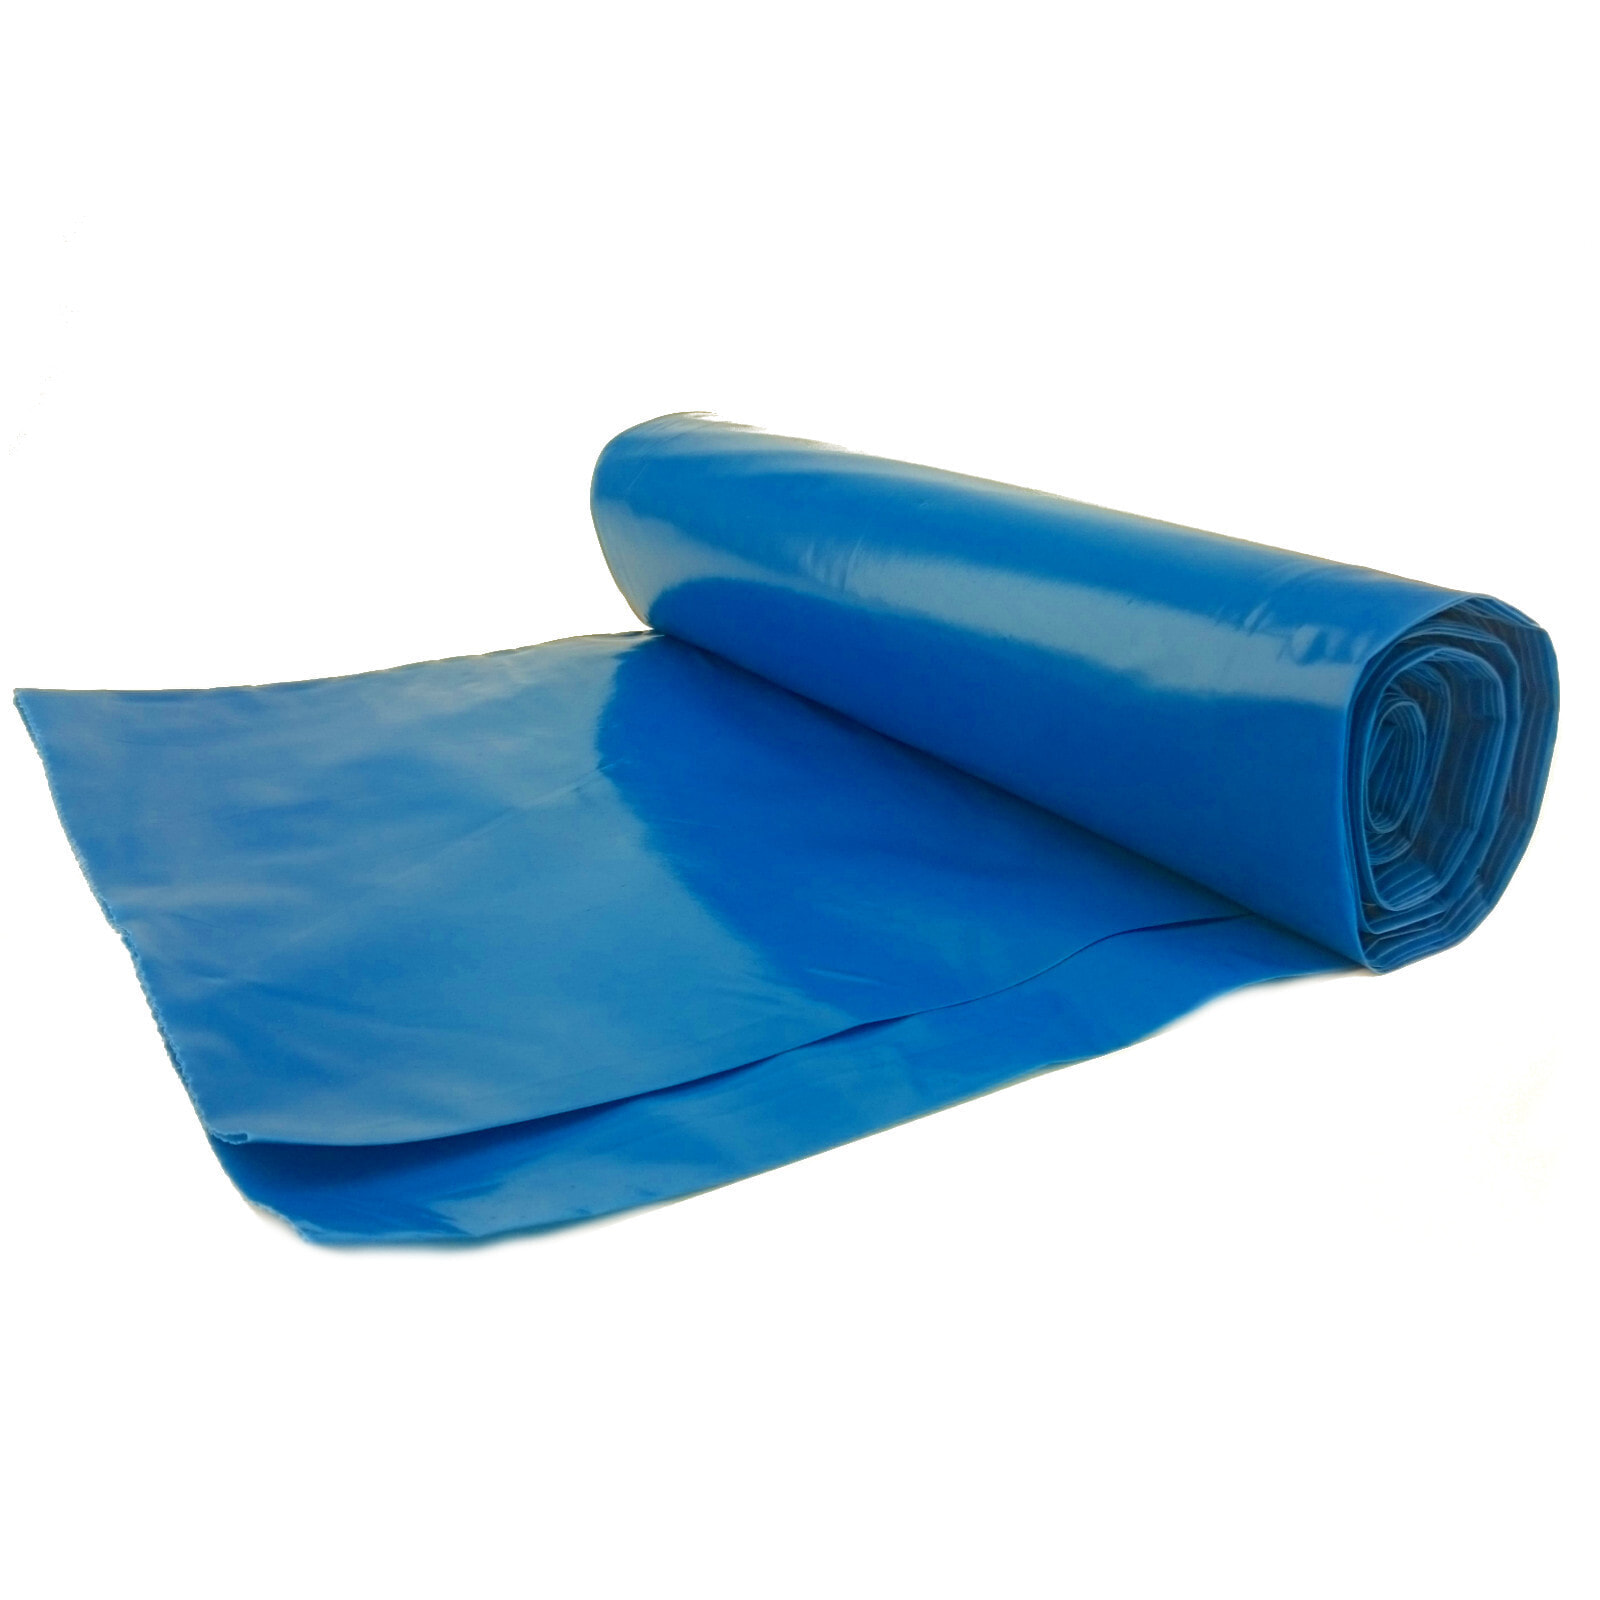 80 micron thick garbage bags. durable roll 15 pcs. - blue 120L